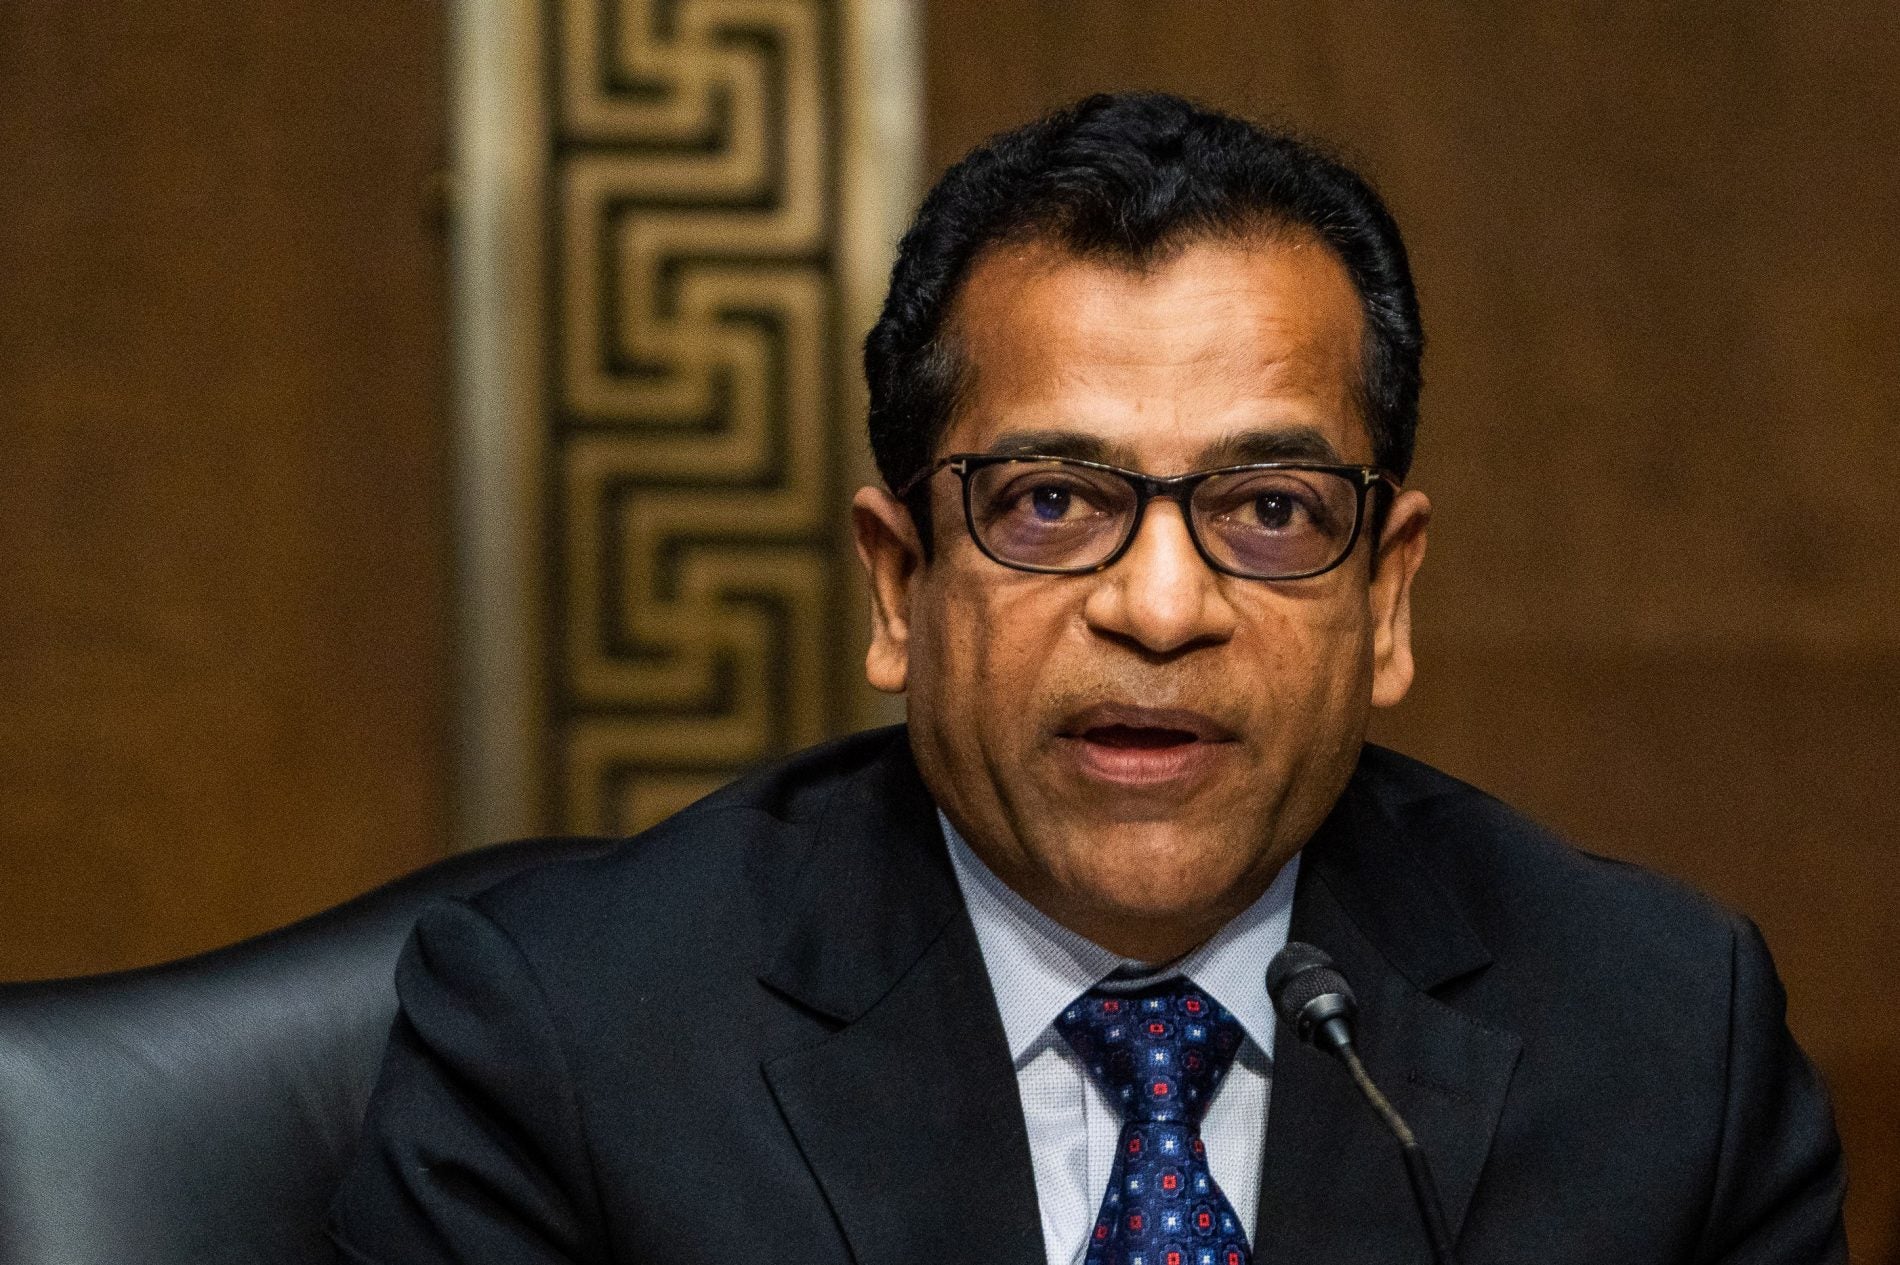 SolarWinds CEO and President Sudhakar Ramakrishna inherited the attack. He was hired shortly before the breach was discovered and stepped into the job just as the full extent of the hack became clear. (Demetrius Freeman/Pool/AFP via Getty Images)